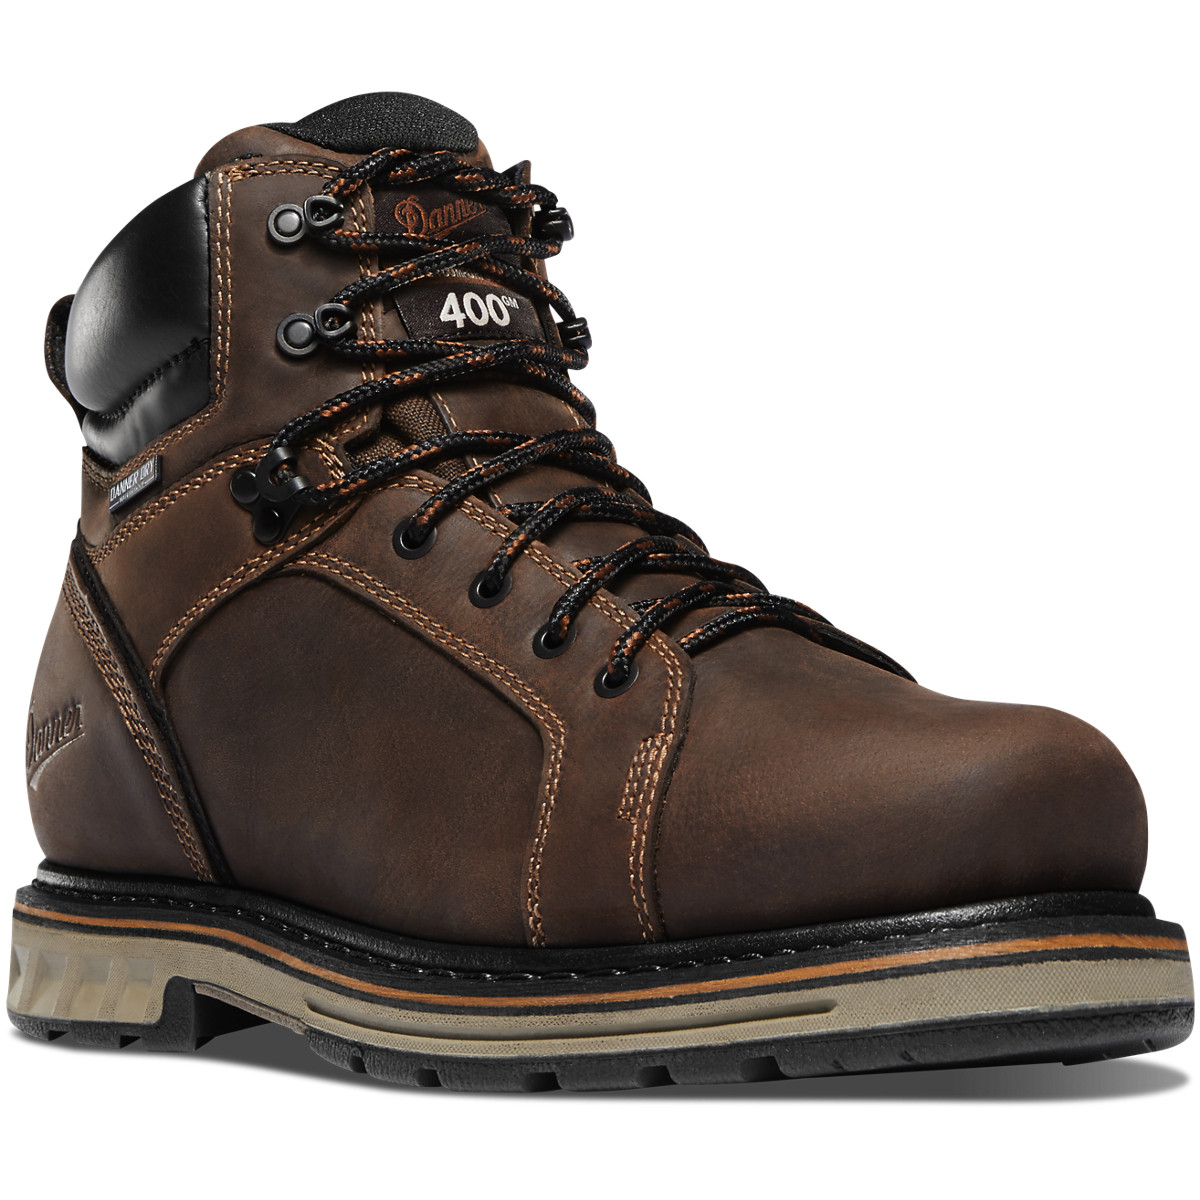 Danner Steel Yard 6 Inch Steel Toe Boots from Columbia Safety